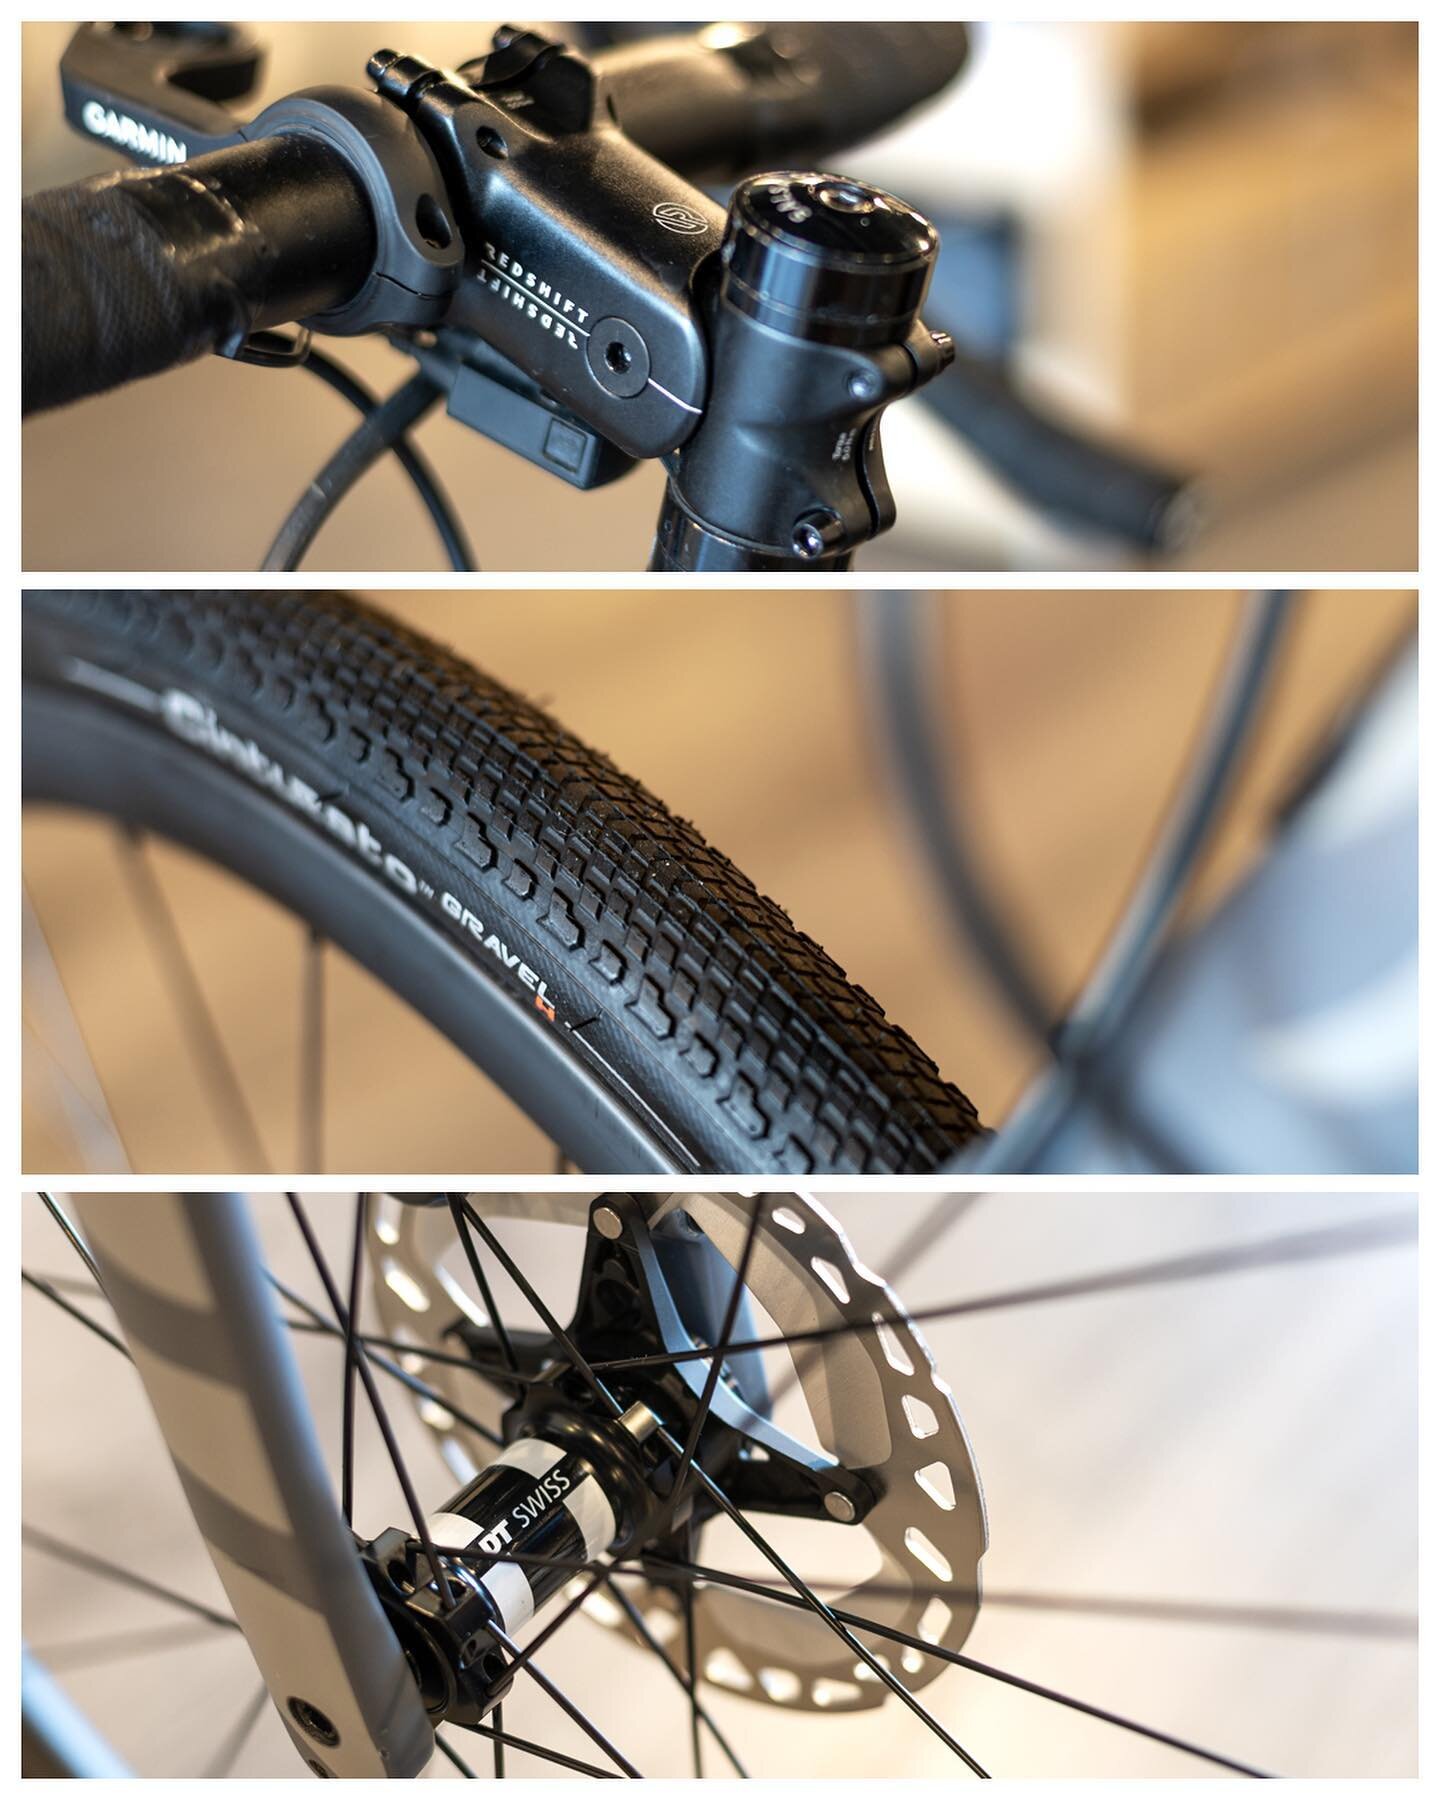 House Built carbon wheels w/DT350 straight pull hubs and a Redshift suspension stem, for one of our favorite customers.
#bicyclehouseatx #housebuilt #customwheels #bikerepair #bikefit